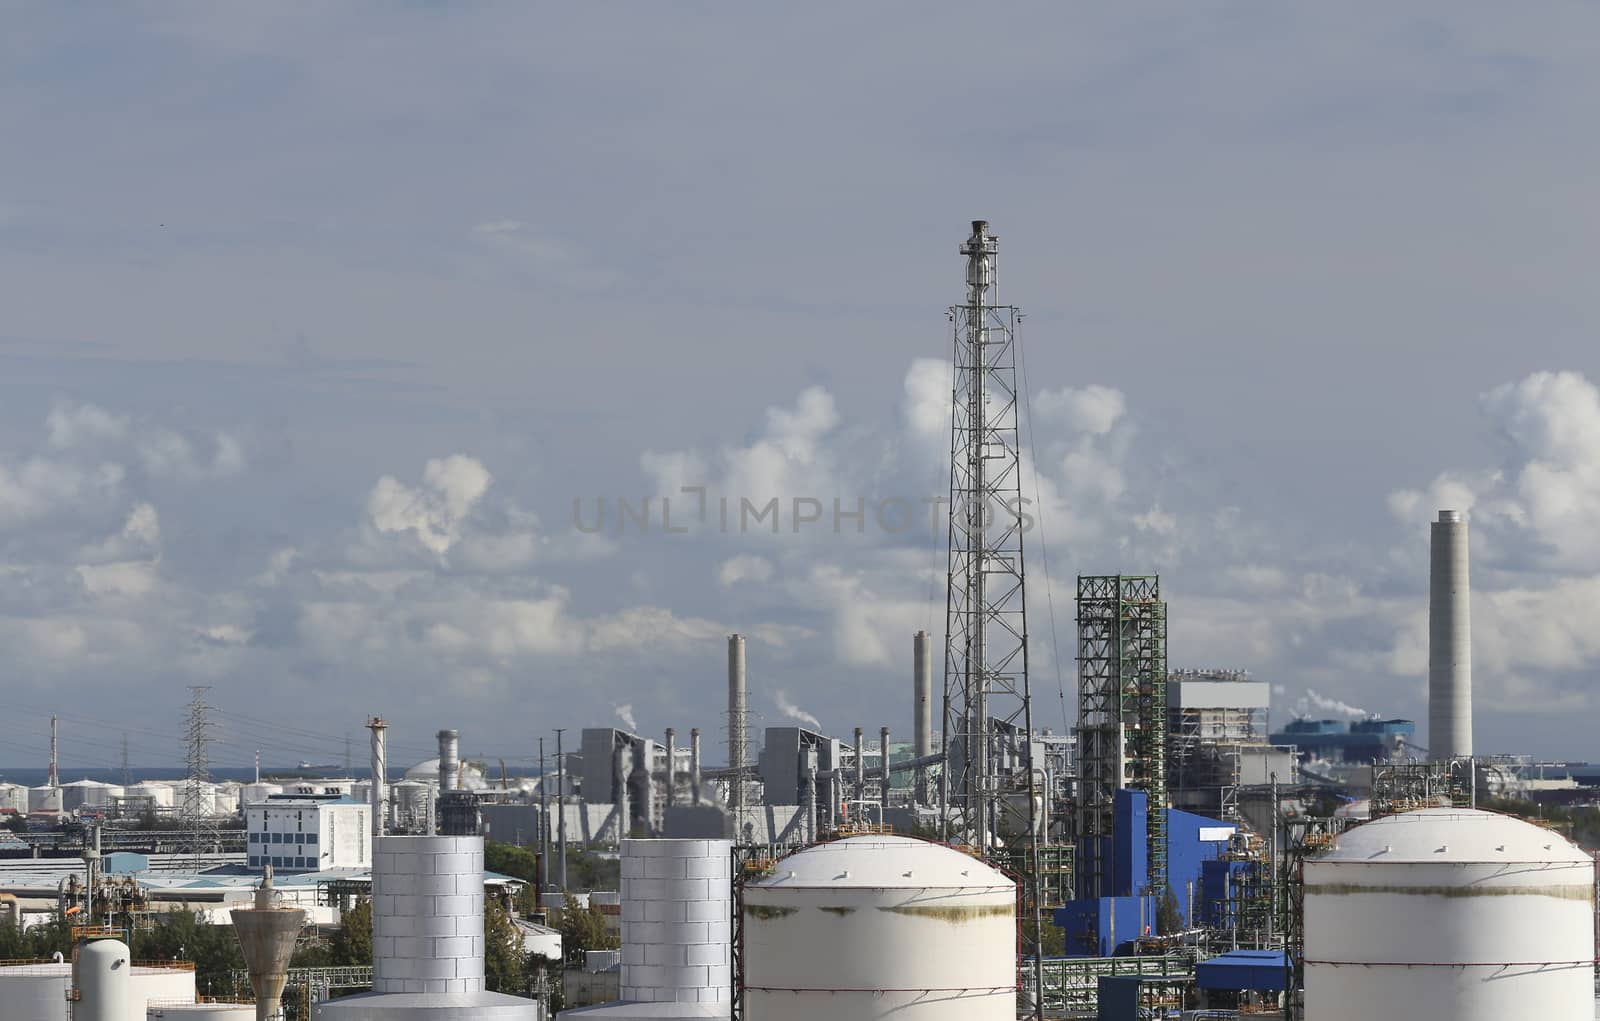 Oil and chemical area with cloud sky